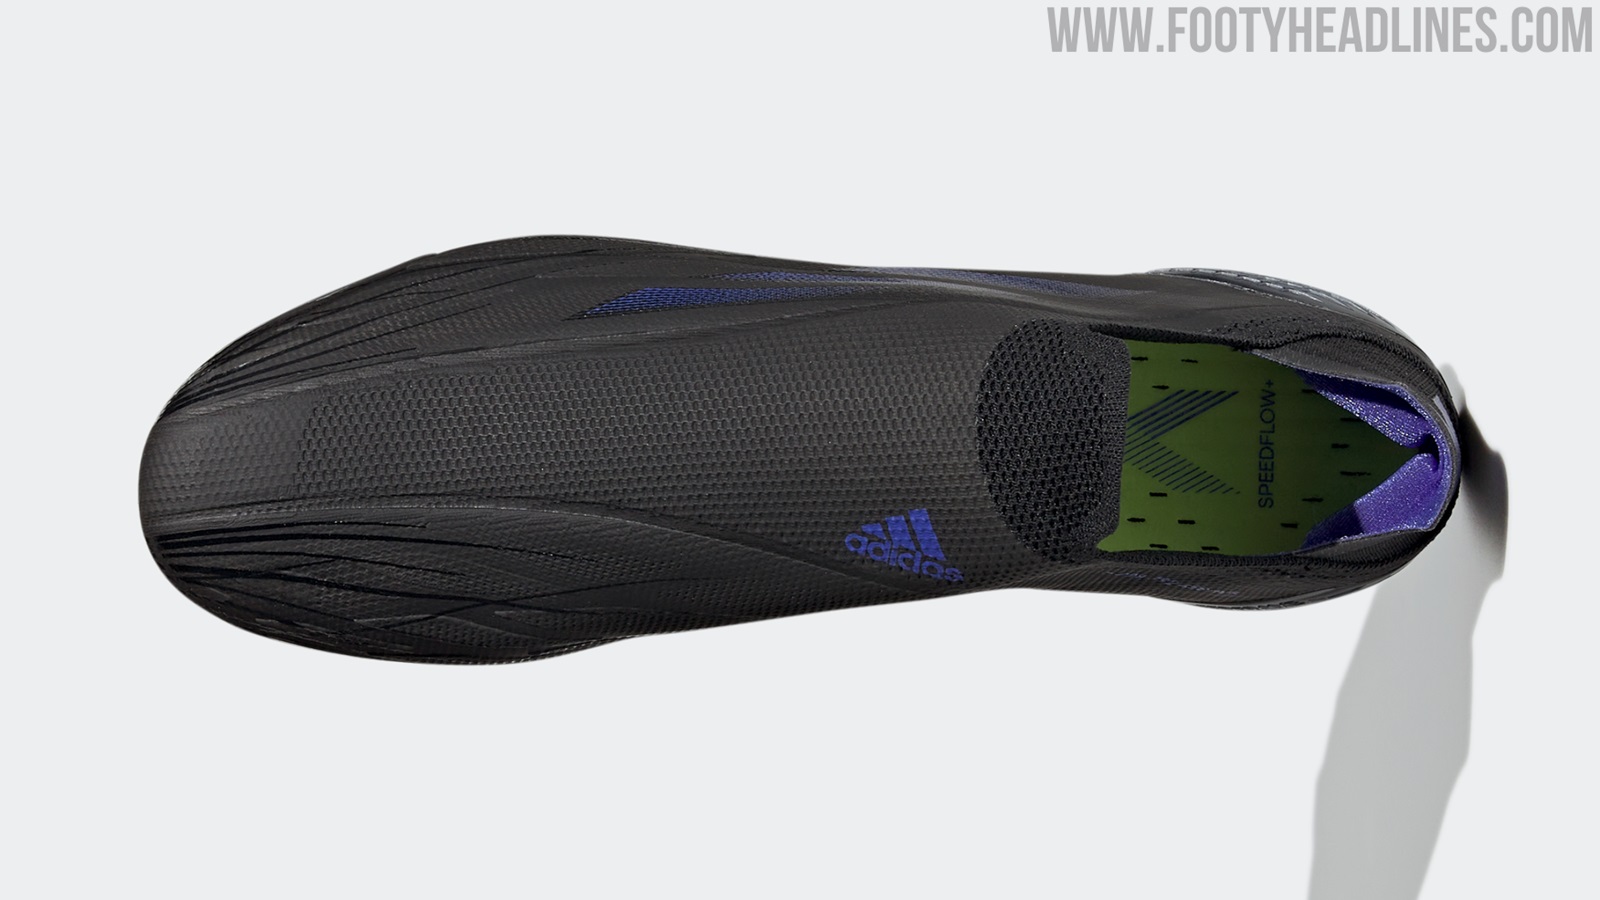 Adidas Escape Light Pack Released - Stealth Copa, Predator and X ...